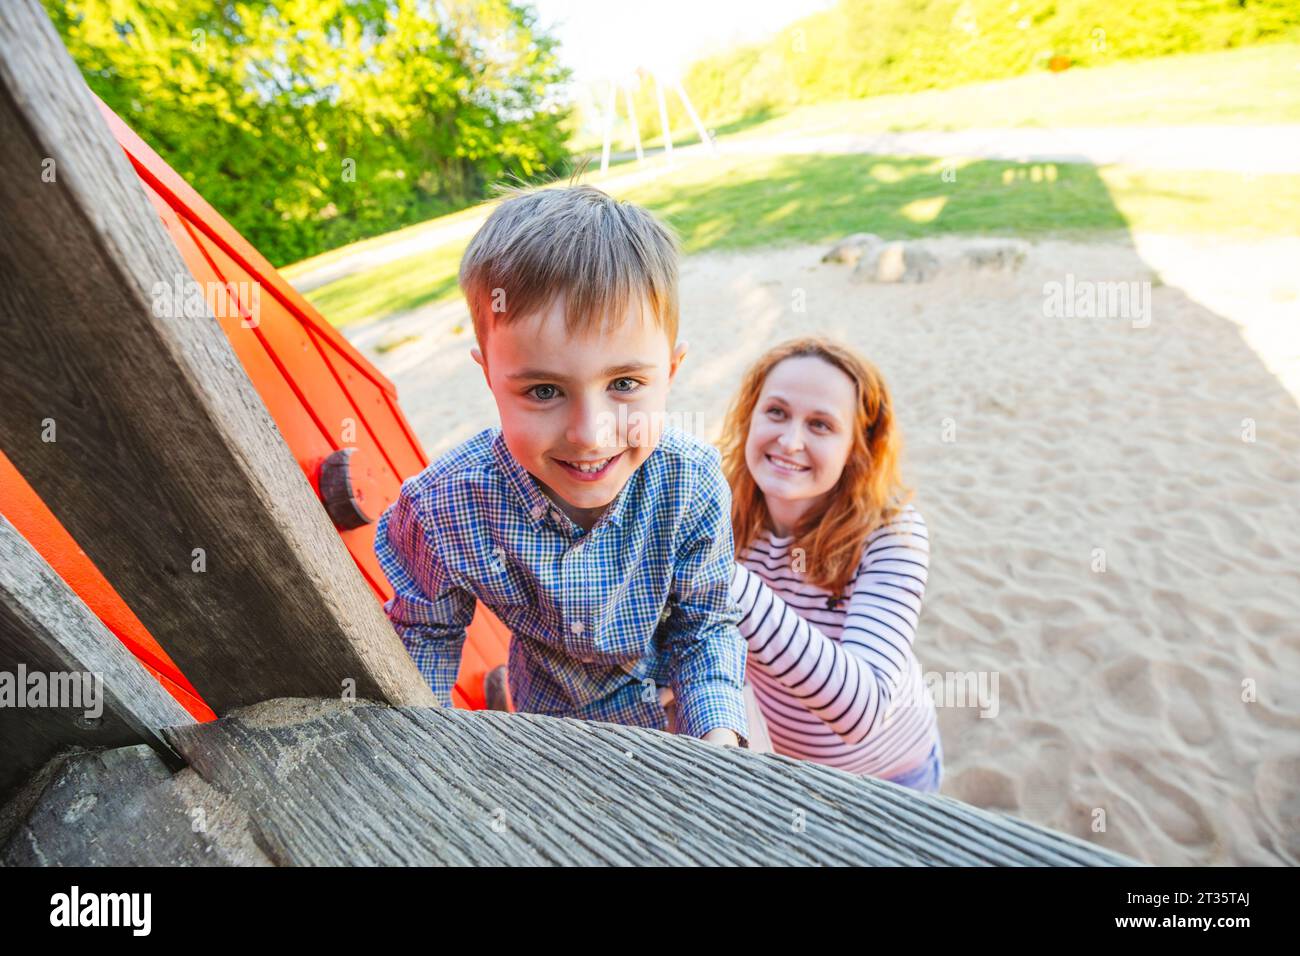 Mother helping son to climb outdoor play equipment at playground Stock Photo